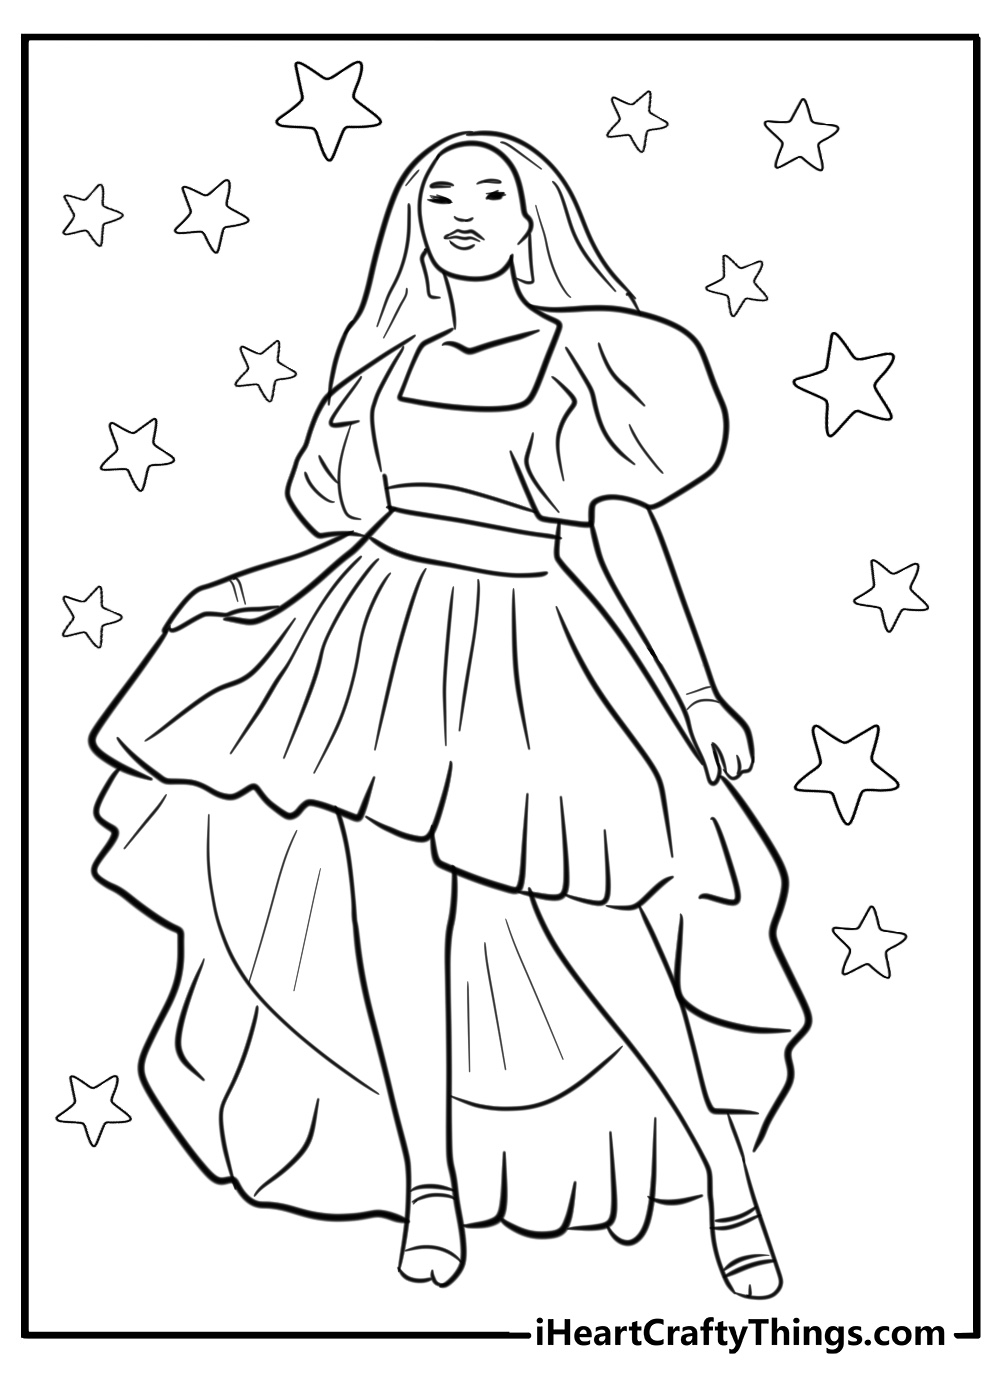 Simple maxi dress coloring page with high low skirt